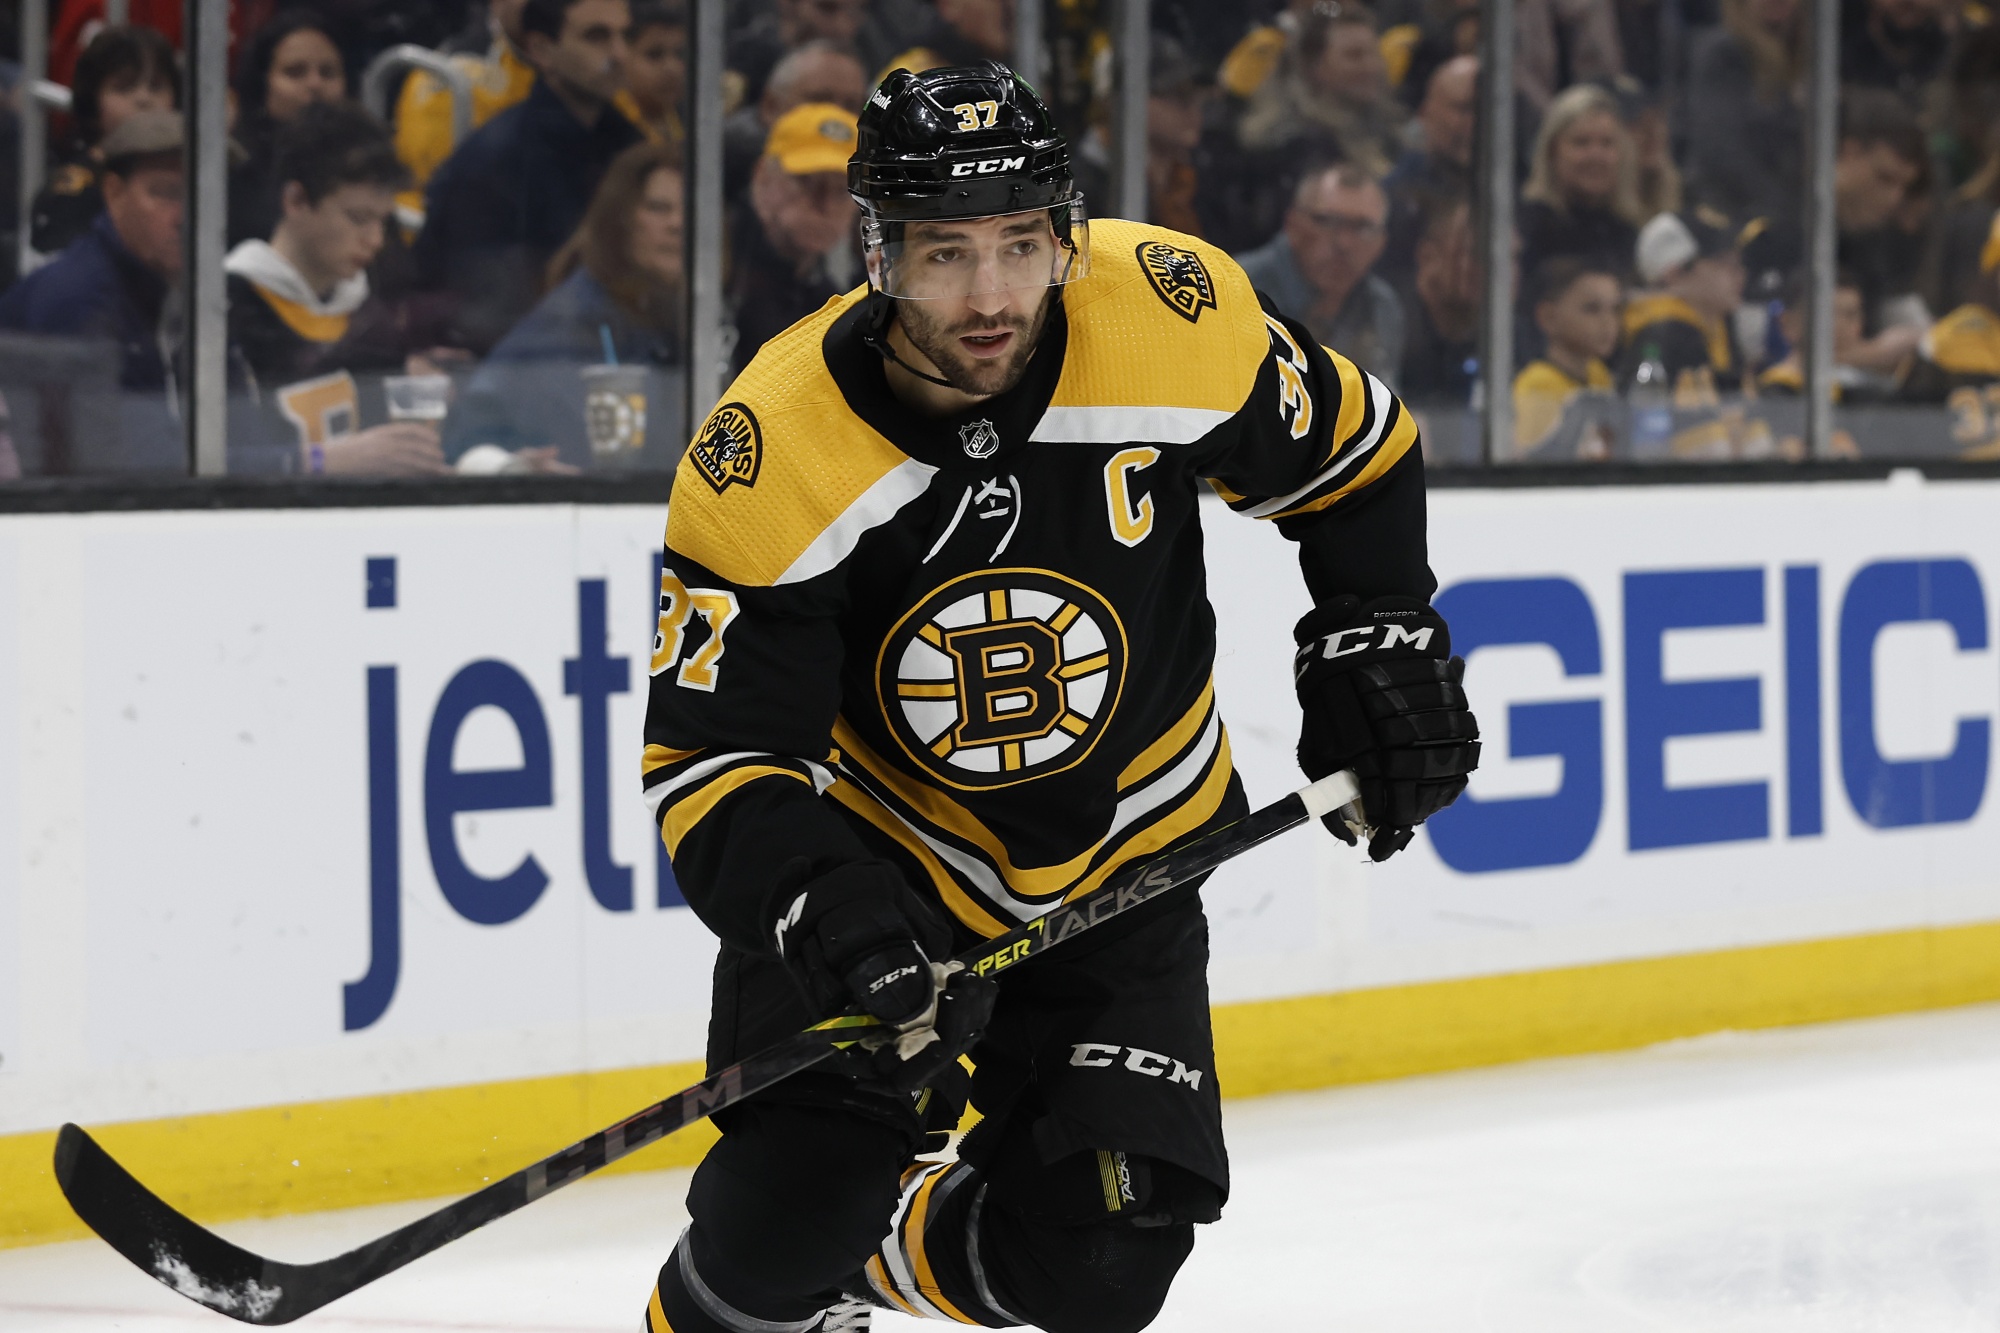 Murphy: Will Marchand Be New Bruins Captain?